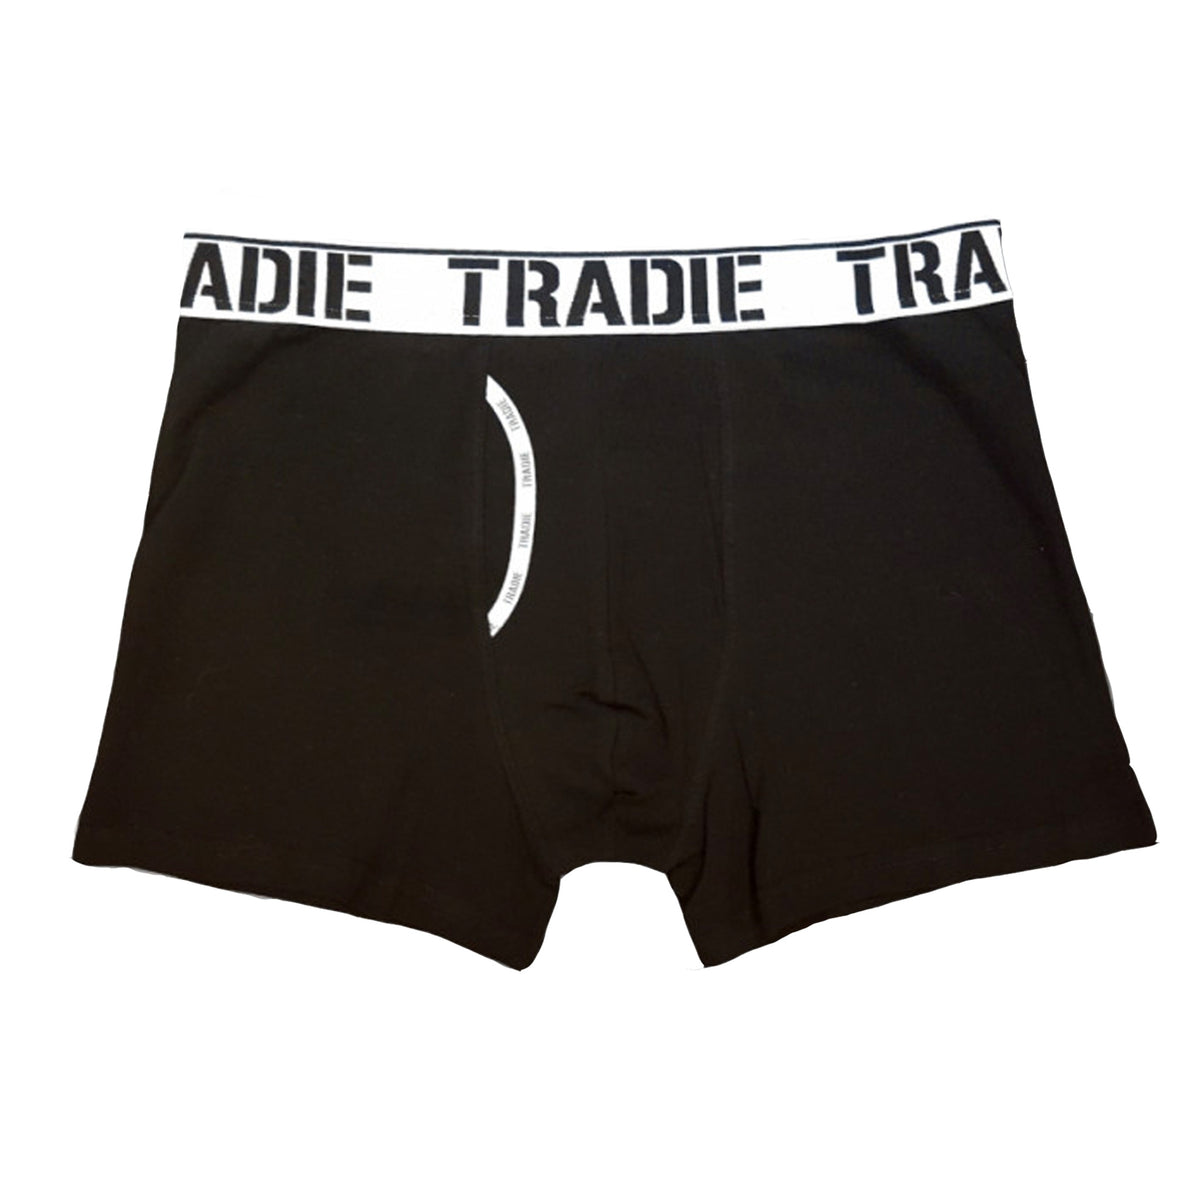 Tradie Brand - ON THE BURST! Tradie Honey Badger sports mid length trunks  now available online!